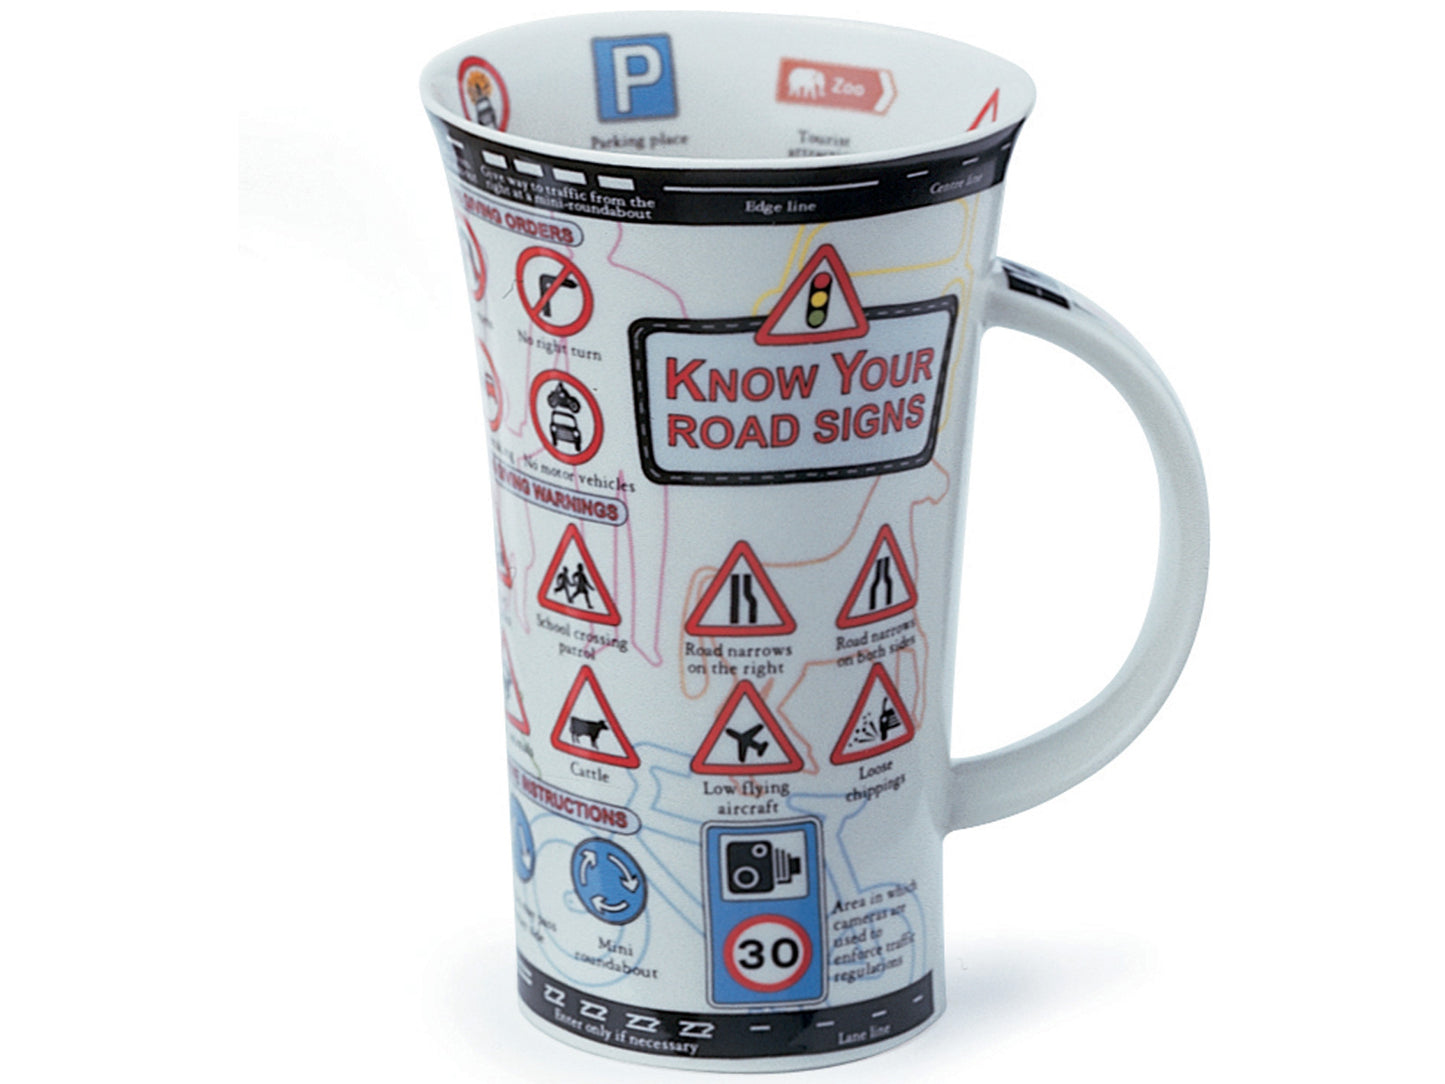 Dunoon Glencoe Know Your Road Signs Mug is a large fine bone china mug that is printed with all different road signs across its exterior, along with the more obscure signs printed around the inner rim of the mug.